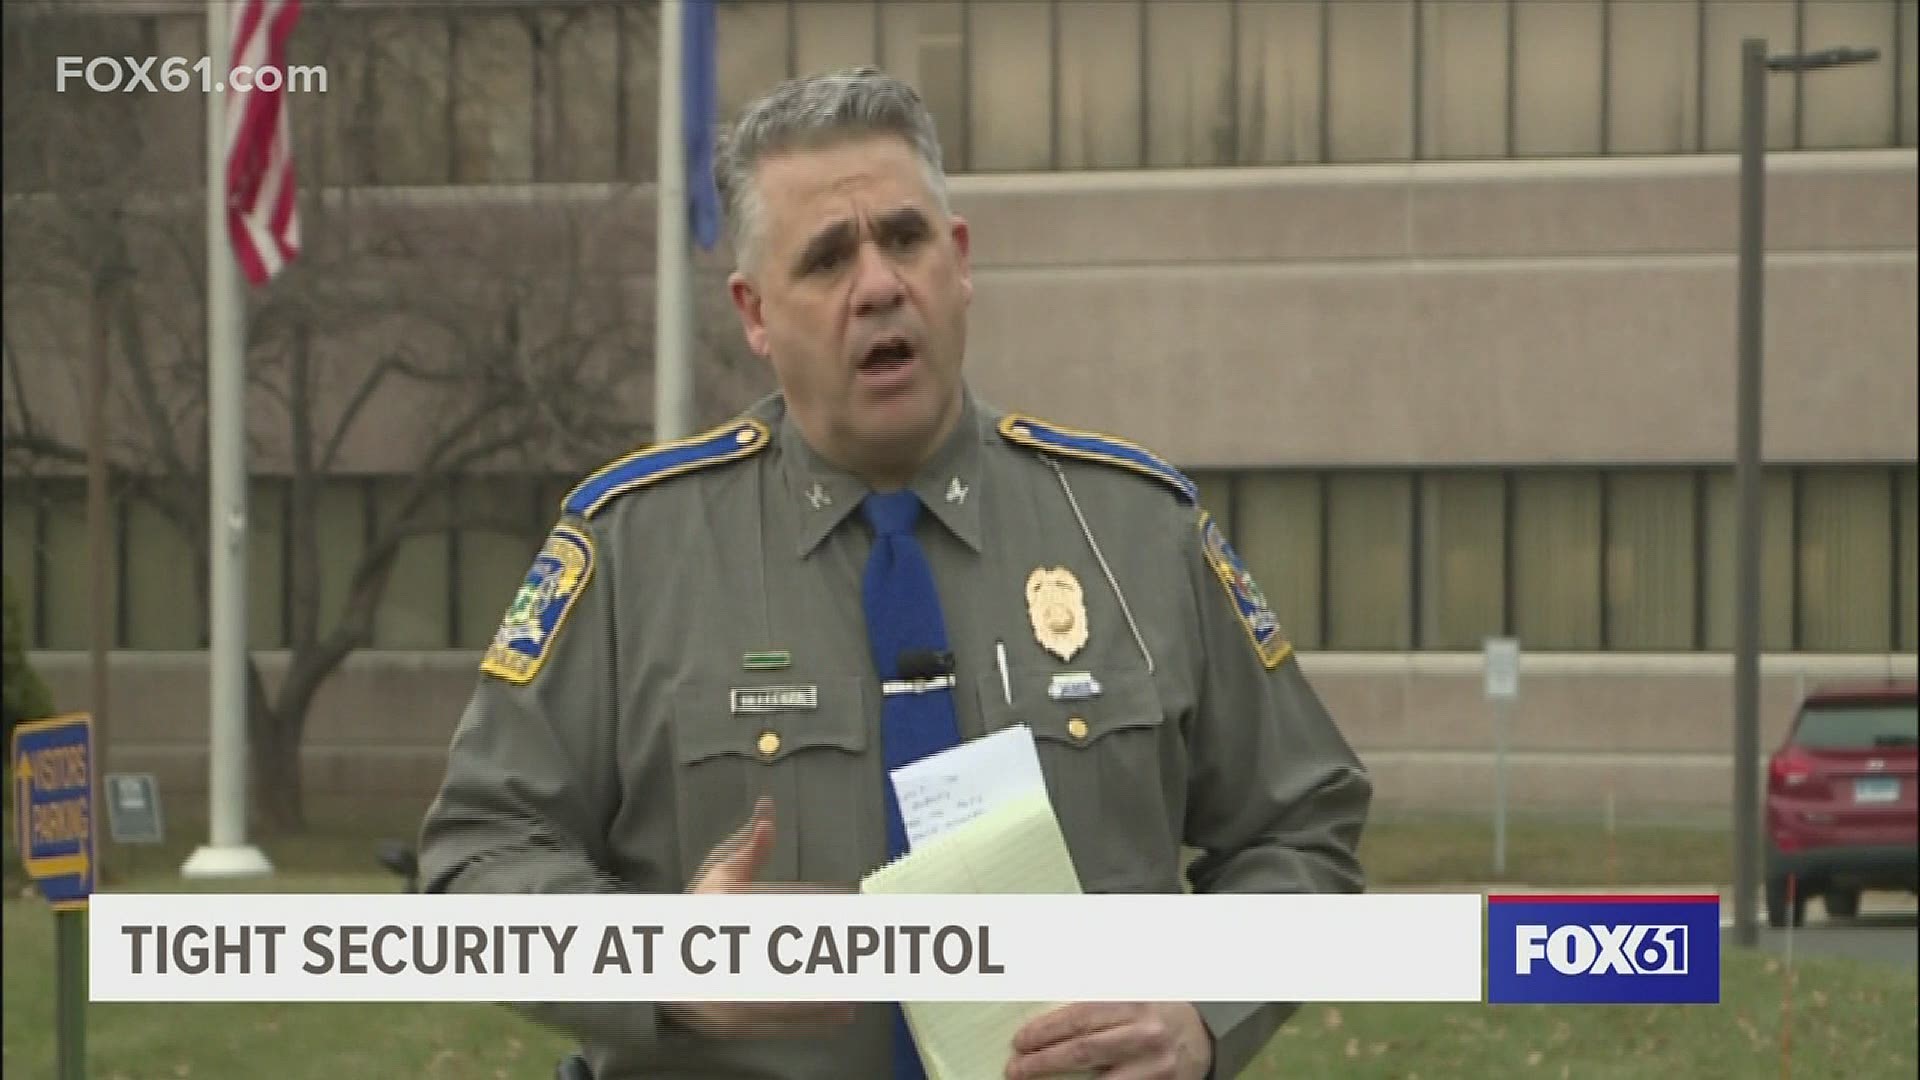 Commander of the State Police on security at the Capitol